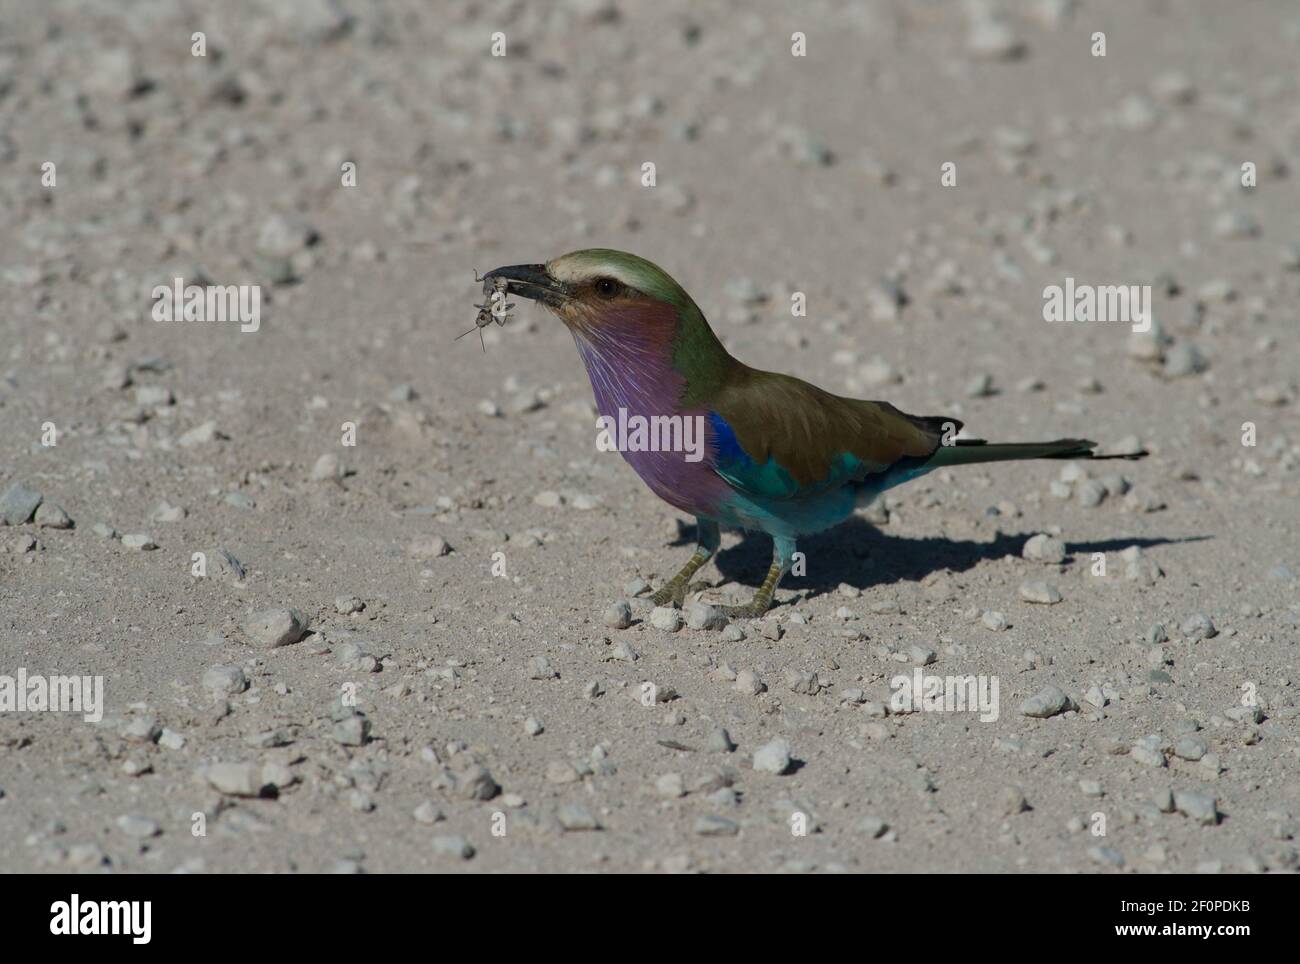 lilac breasted roller or Coracias caudata, with bug in beak standing on ground found on jeep safari in Etosha National Park  in Namibia Africa travel Stock Photo